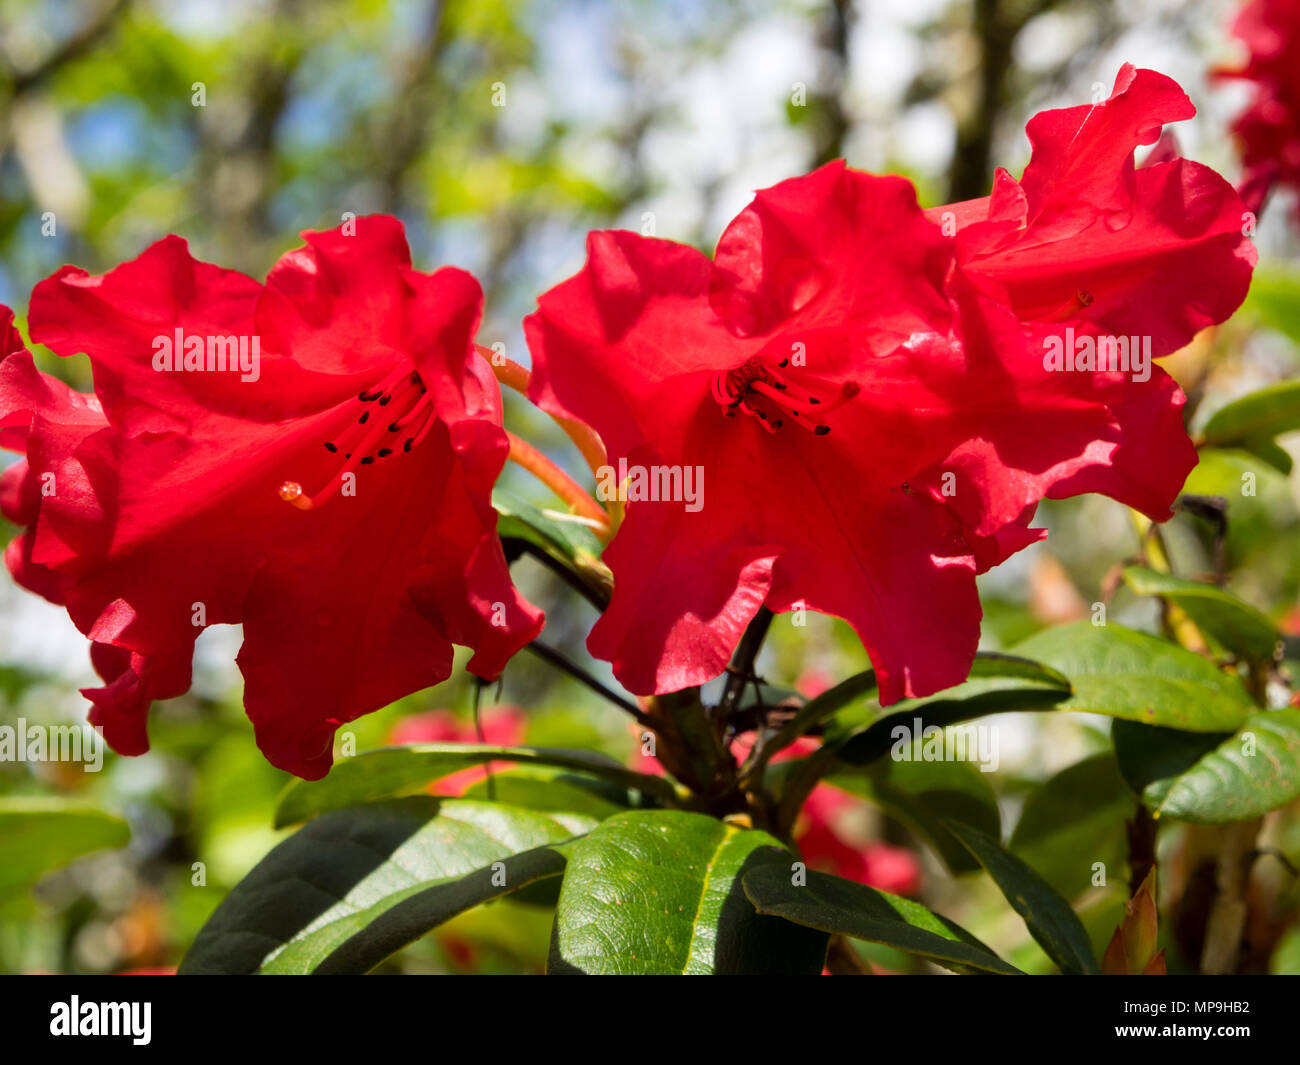 Red flowers arrayed in small trusses of the compact evergreen, Rhododendron 'Scarlet Wonder' Stock Photo